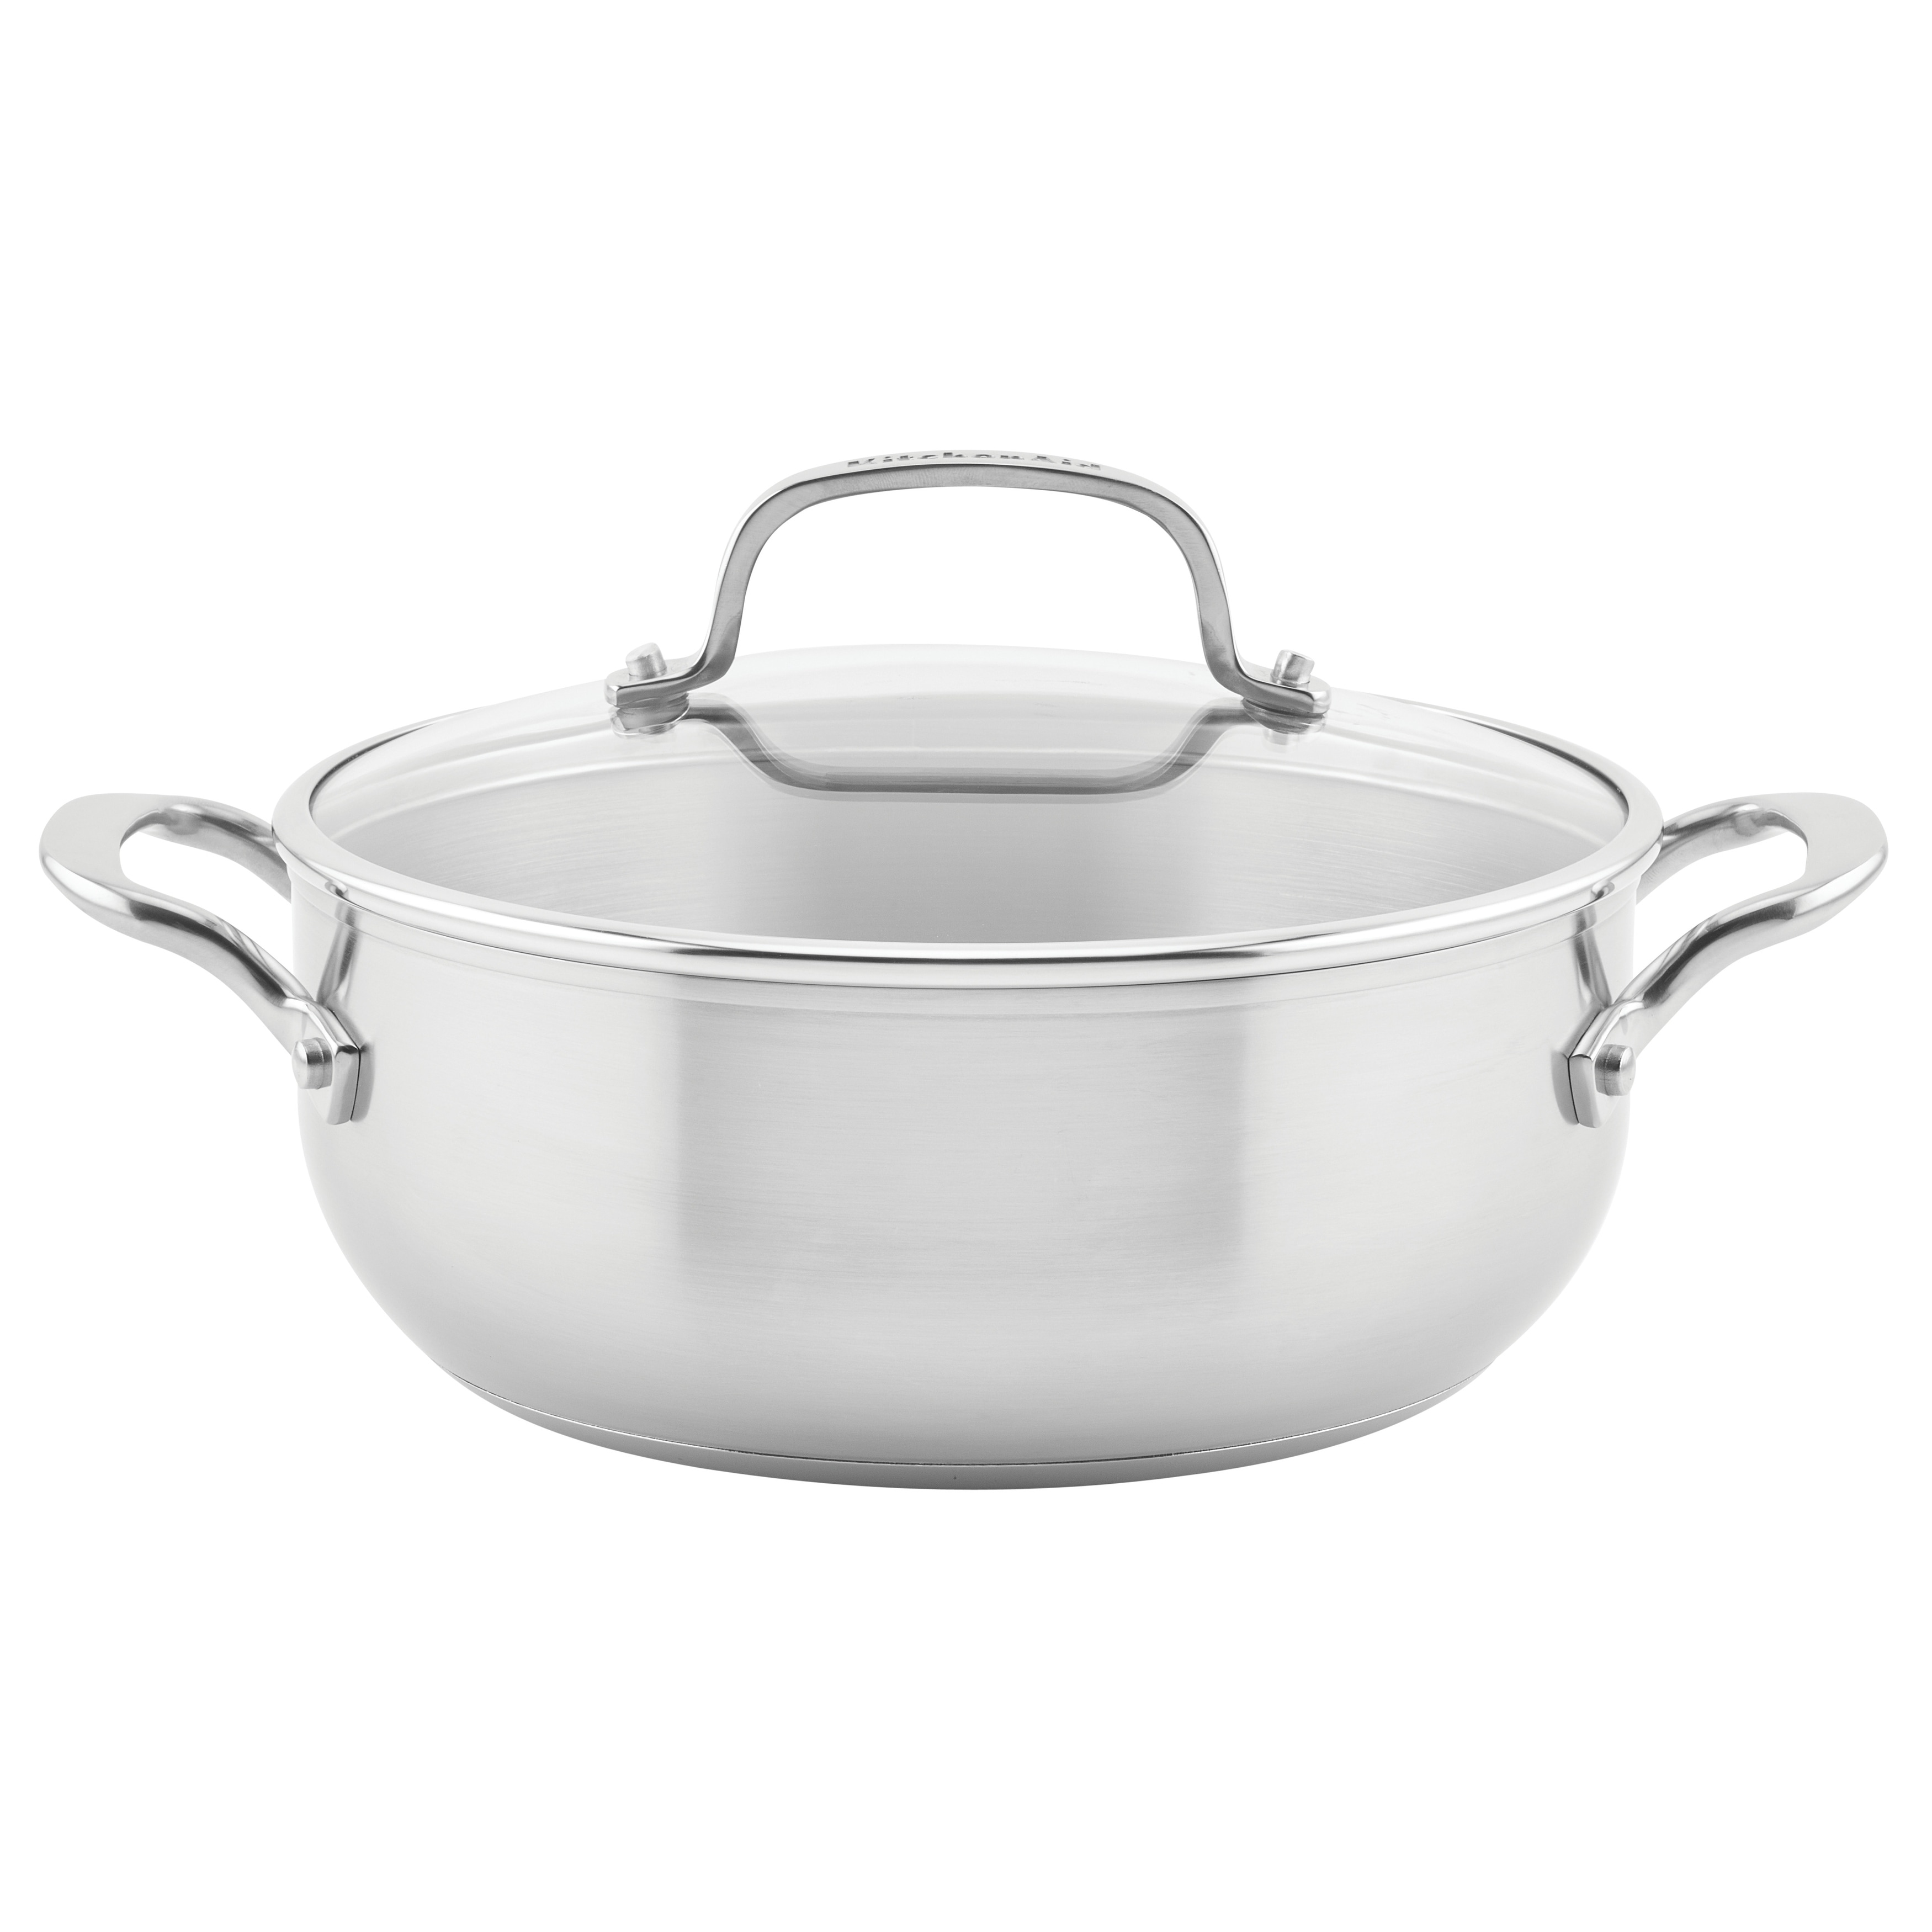 https://ak1.ostkcdn.com/images/products/is/images/direct/eb802f0ce72a2037fd630470ed04b80e87226069/KitchenAid-3-Ply-Base-4-Quart-Casserole-Brushed-Stainless-Steel.jpg